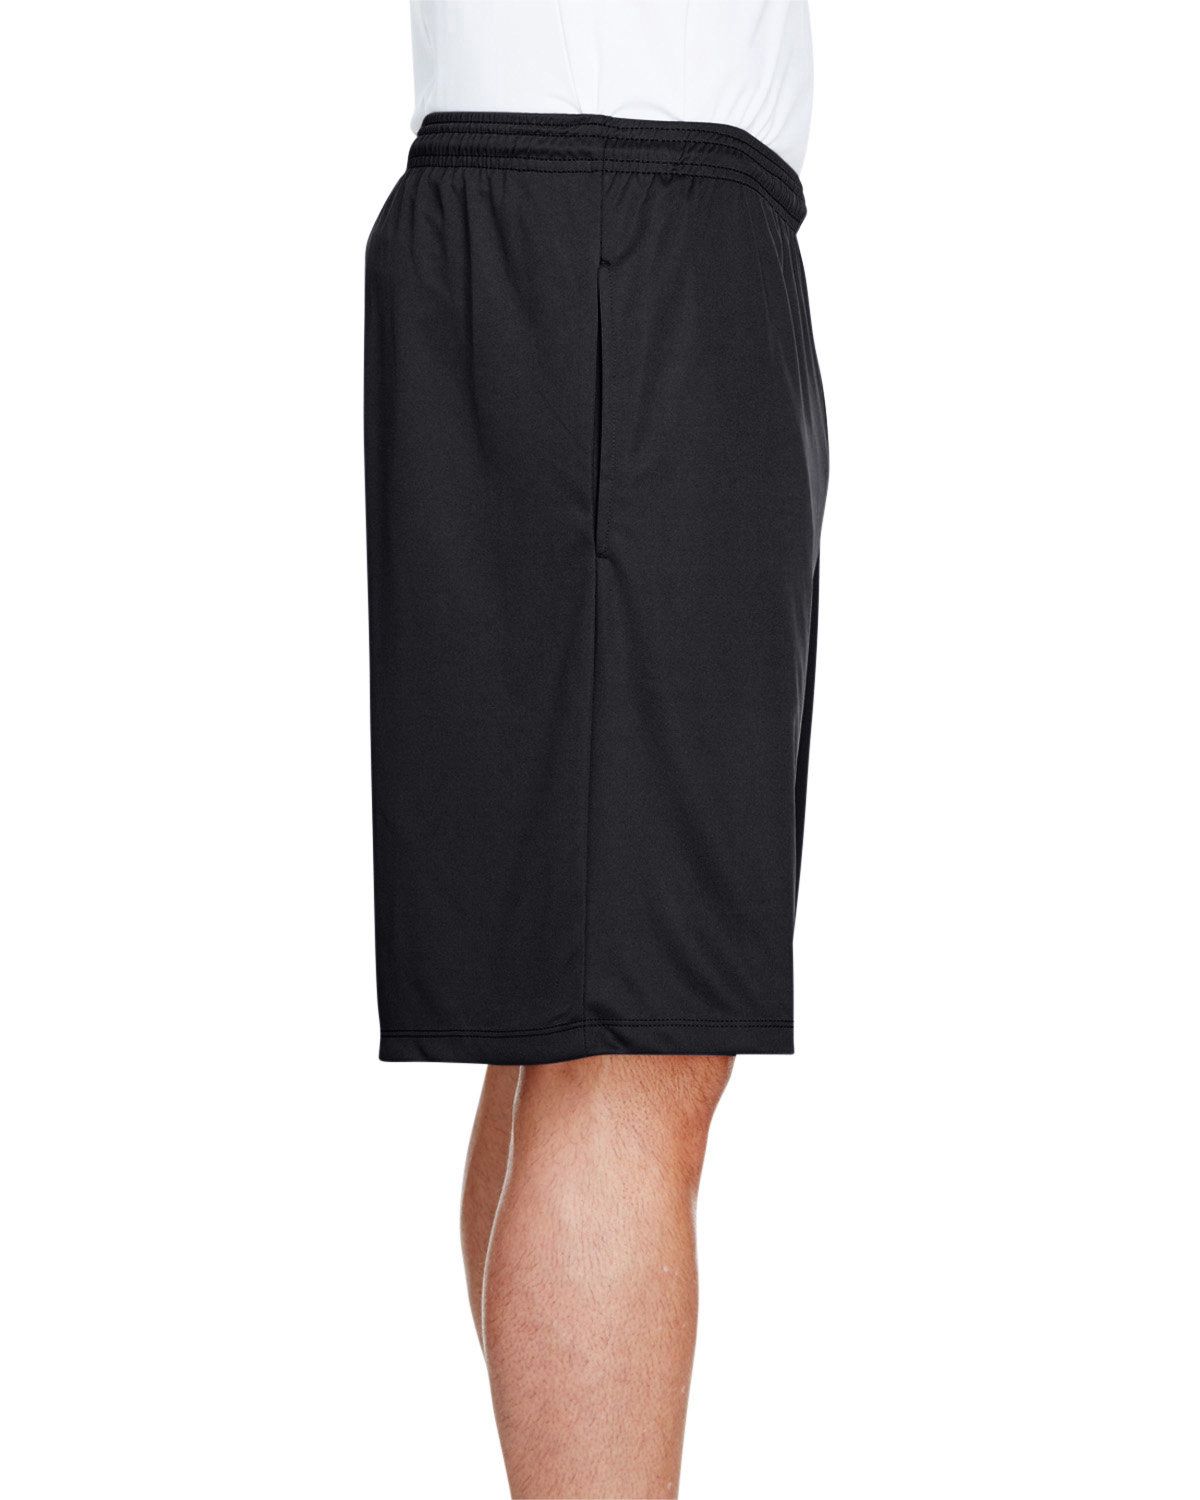 'A4 N5338 Men's Pocketed Performance 9 Inch Inseam Shorts'